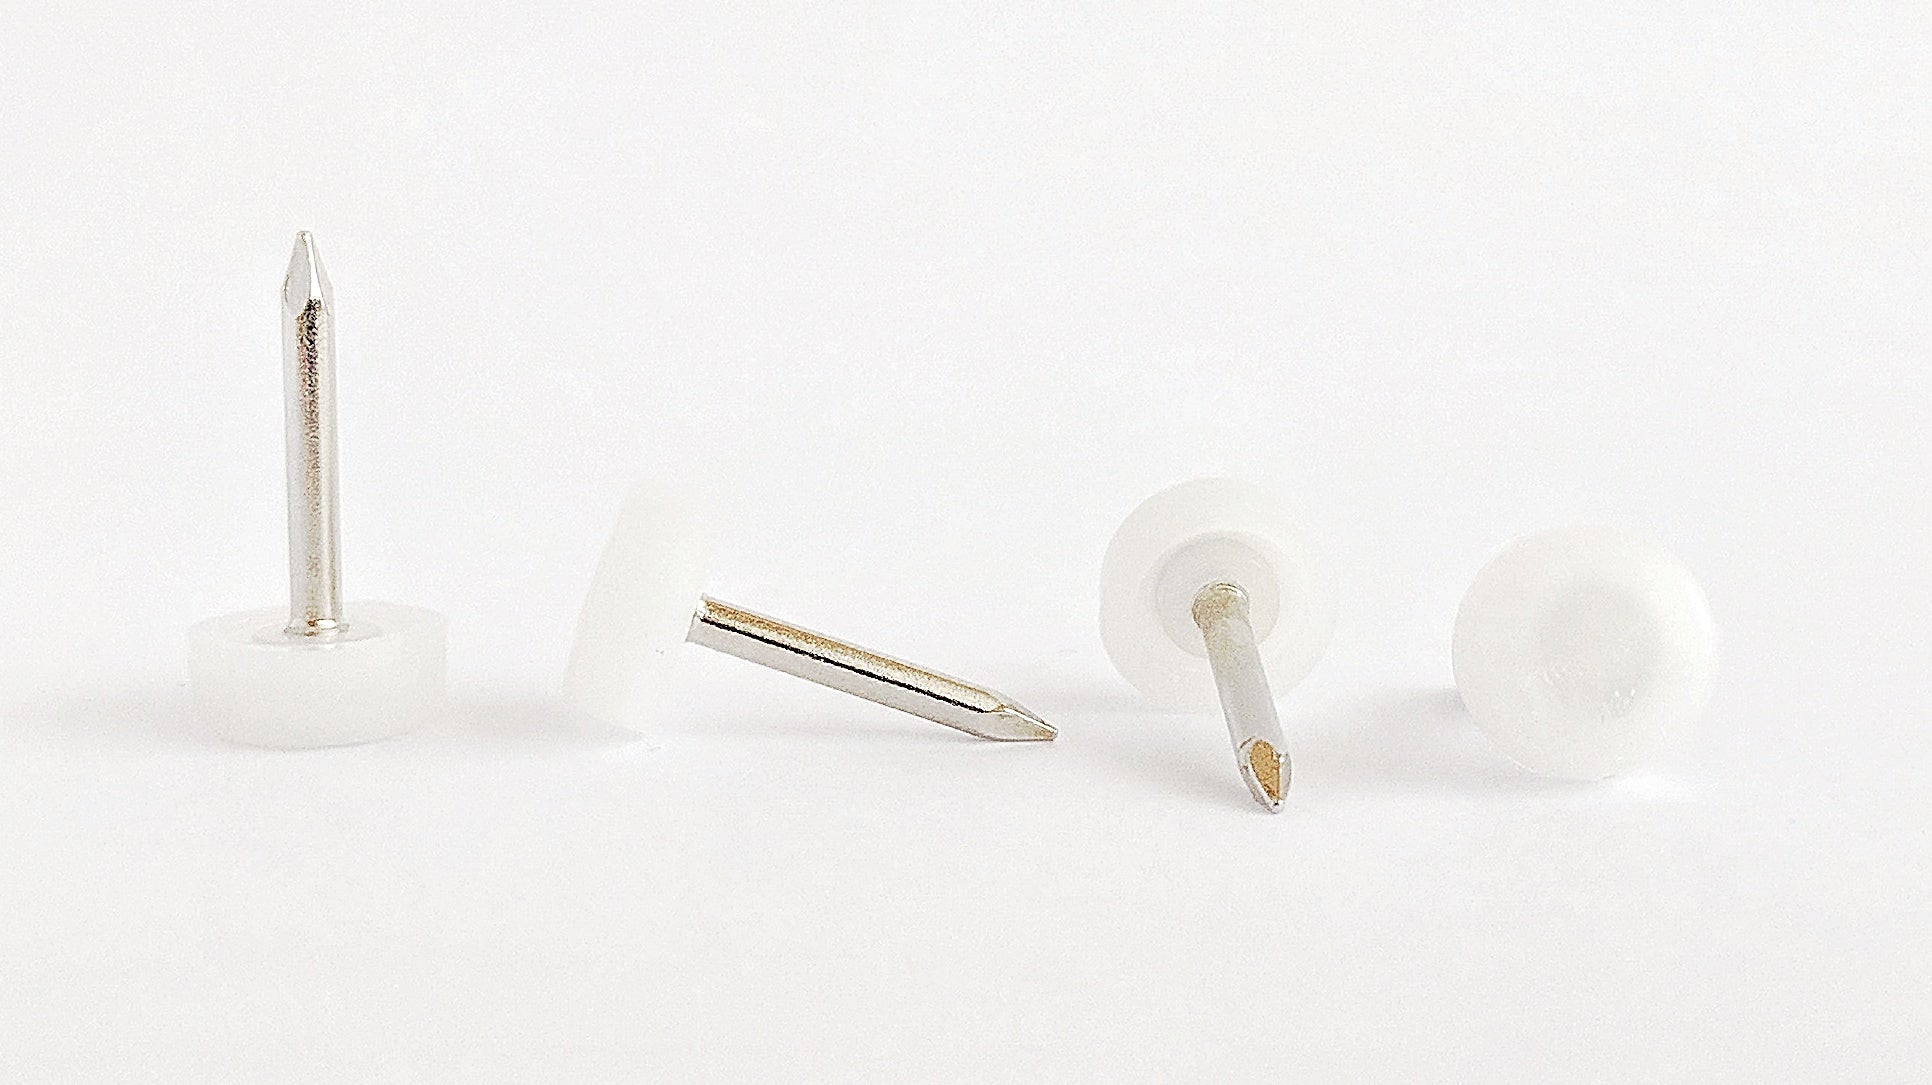 10mm White Plastic Nail On Gliders - Made in Germany - Keay Vital Parts